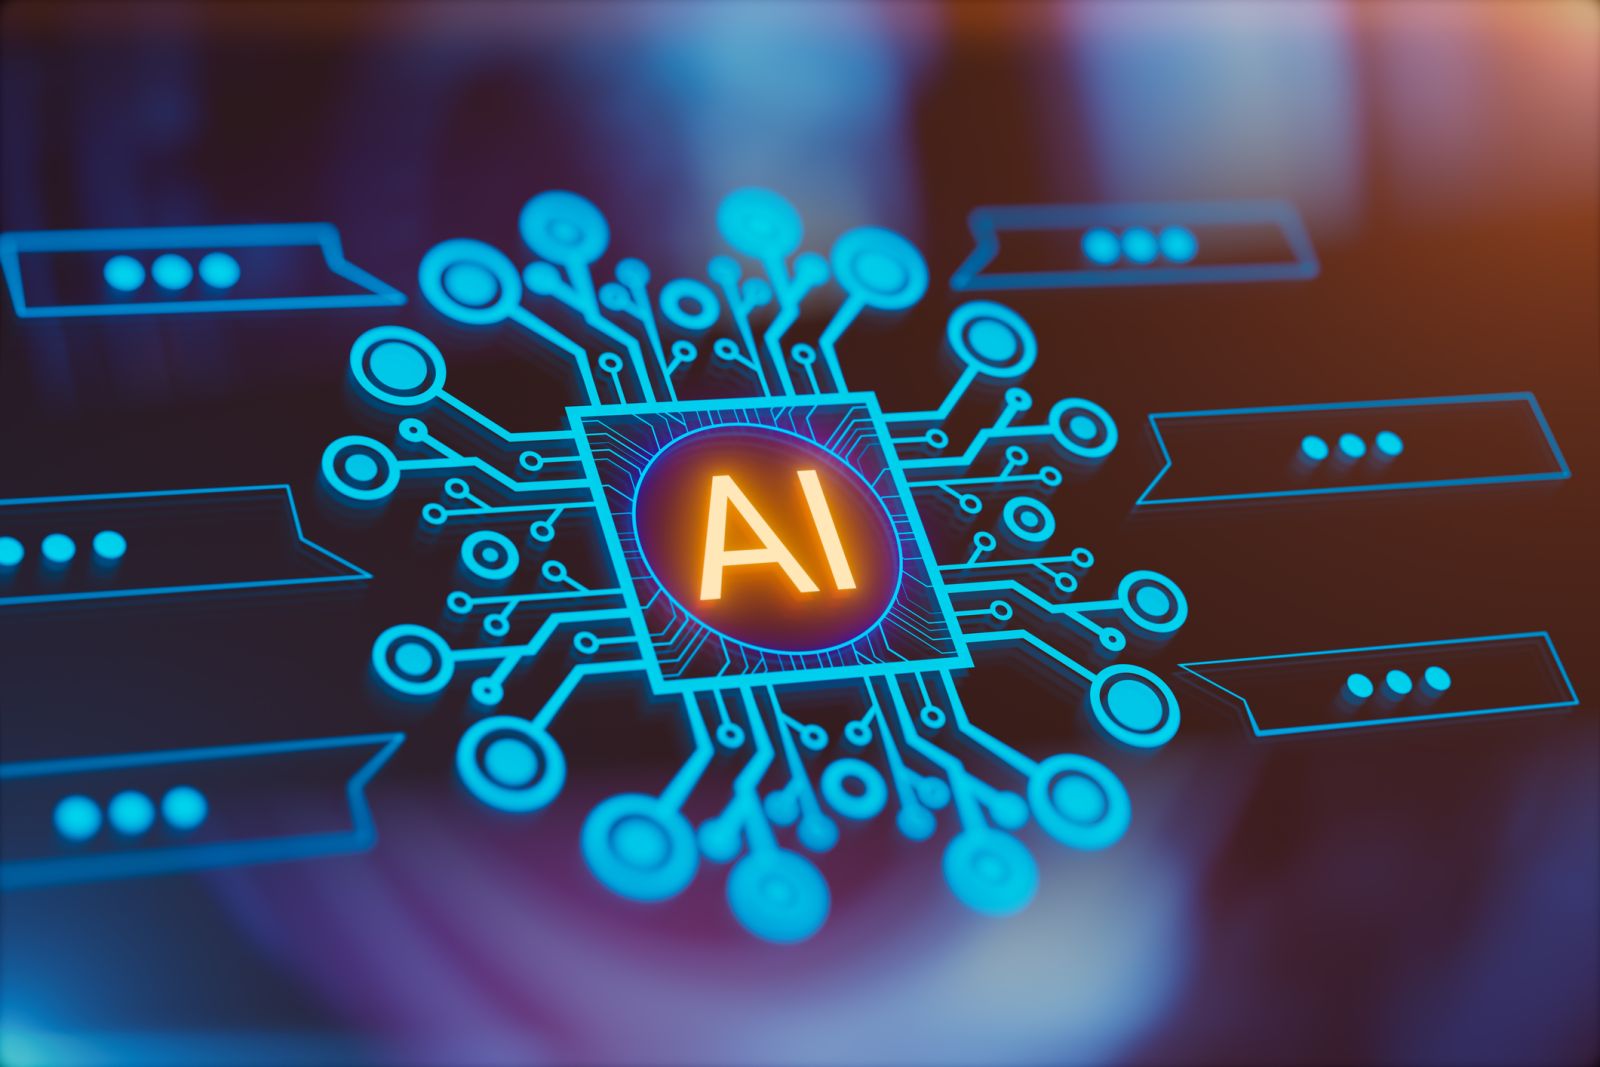 AI (artificial intelligence) - Artificial intelligence and machine learning concept - by amgun via iStock